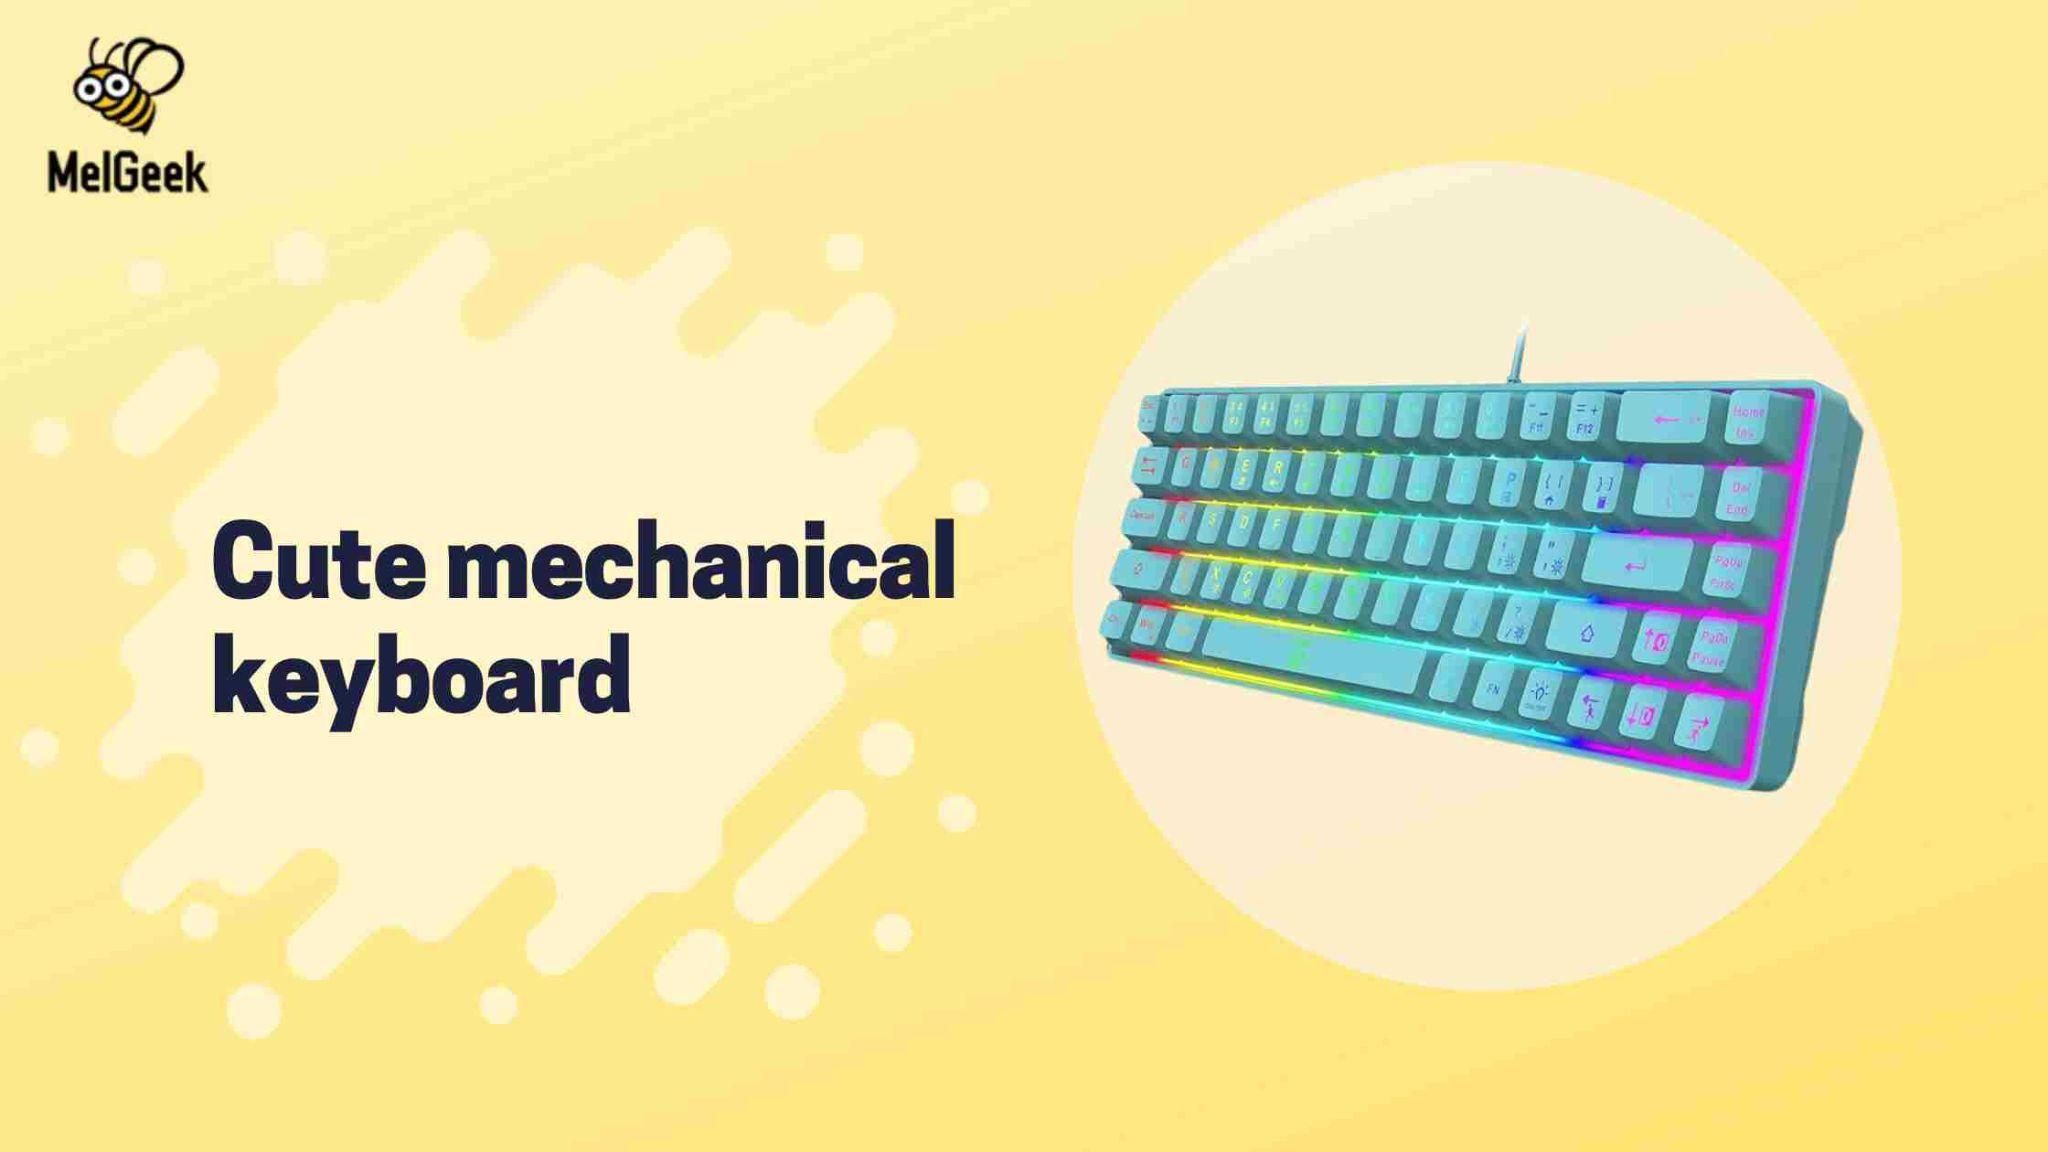 Cute Mechanical Keyboard: Aesthetic & Functional Choices for Typists